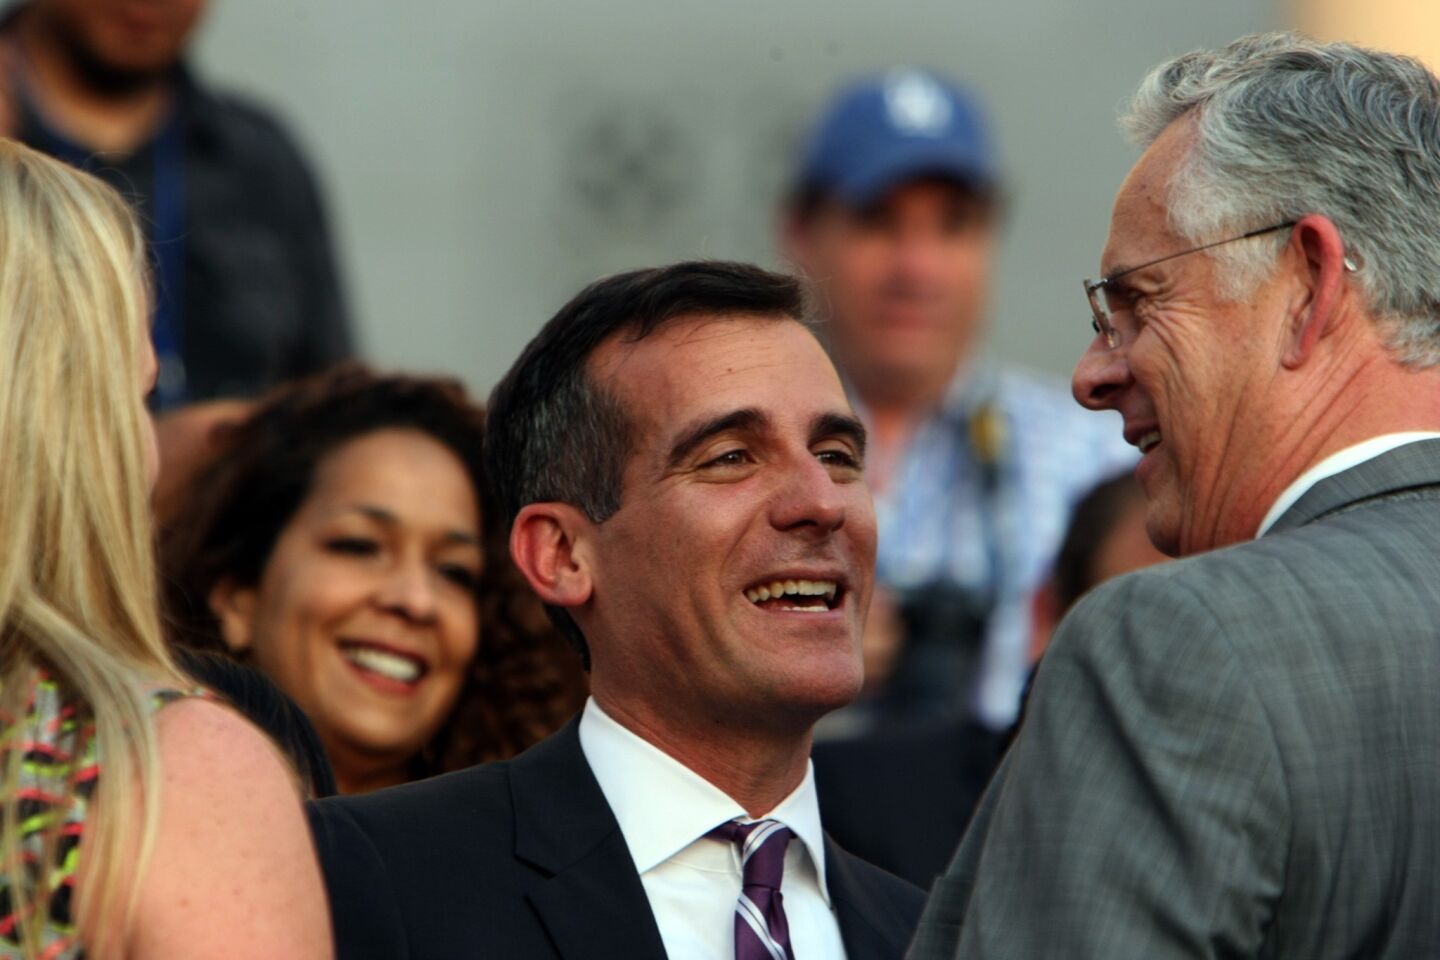 Eric Garcetti chats with former L.A. Mayor James Hahn. "You are the mayor of a world-class city, and you are going to be on the world stage," Hahn told him. "But I think the people who live here want somebody who's going to take care of fixing the streets and making sure that the city is safe."